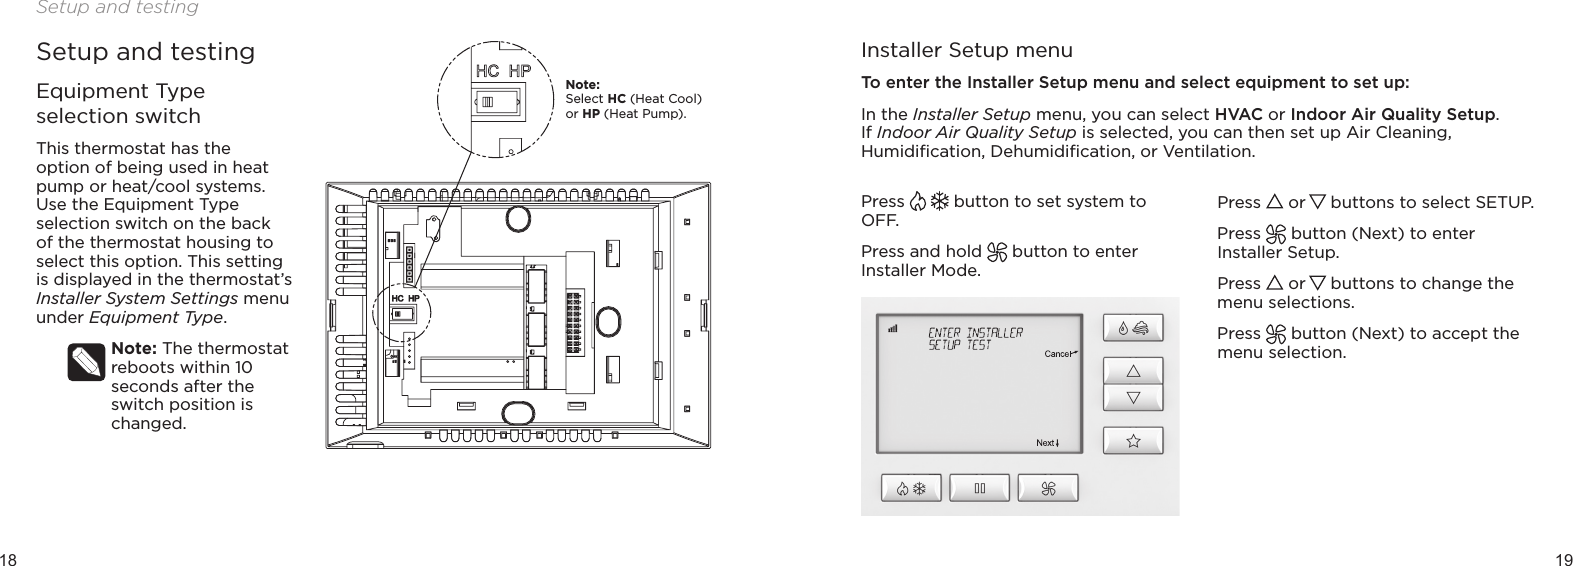 18 19Setup and testingSetup and testingEquipment Type selection switchThis thermostat has the  option of being used in heat pump or heat/cool systems. Use the Equipment Type selection switch on the back of the thermostat housing to select this option. This setting is displayed in the thermostat’s Installer System Settings menu under Equipment Type.Note: The thermostat reboots within 10 seconds after the switch position is changed.Installer Setup menuTo enter the Installer Setup menu and select equipment to set up:In the Installer Setup menu, you can select HVAC or Indoor Air Quality Setup. If Indoor Air Quality Setup is selected, you can then set up Air Cleaning, Humidiﬁcation, Dehumidiﬁcation, or Ventilation.Press   button to set system to OFF. Press and hold   button to enter Installer Mode.Press   or   buttons to select SETUP. Press   button (Next) to enter Installer Setup.Press   or   buttons to change the menu selections.Press   button (Next) to accept the menu selection.Note:  Select HC (Heat Cool) or HP (Heat Pump).